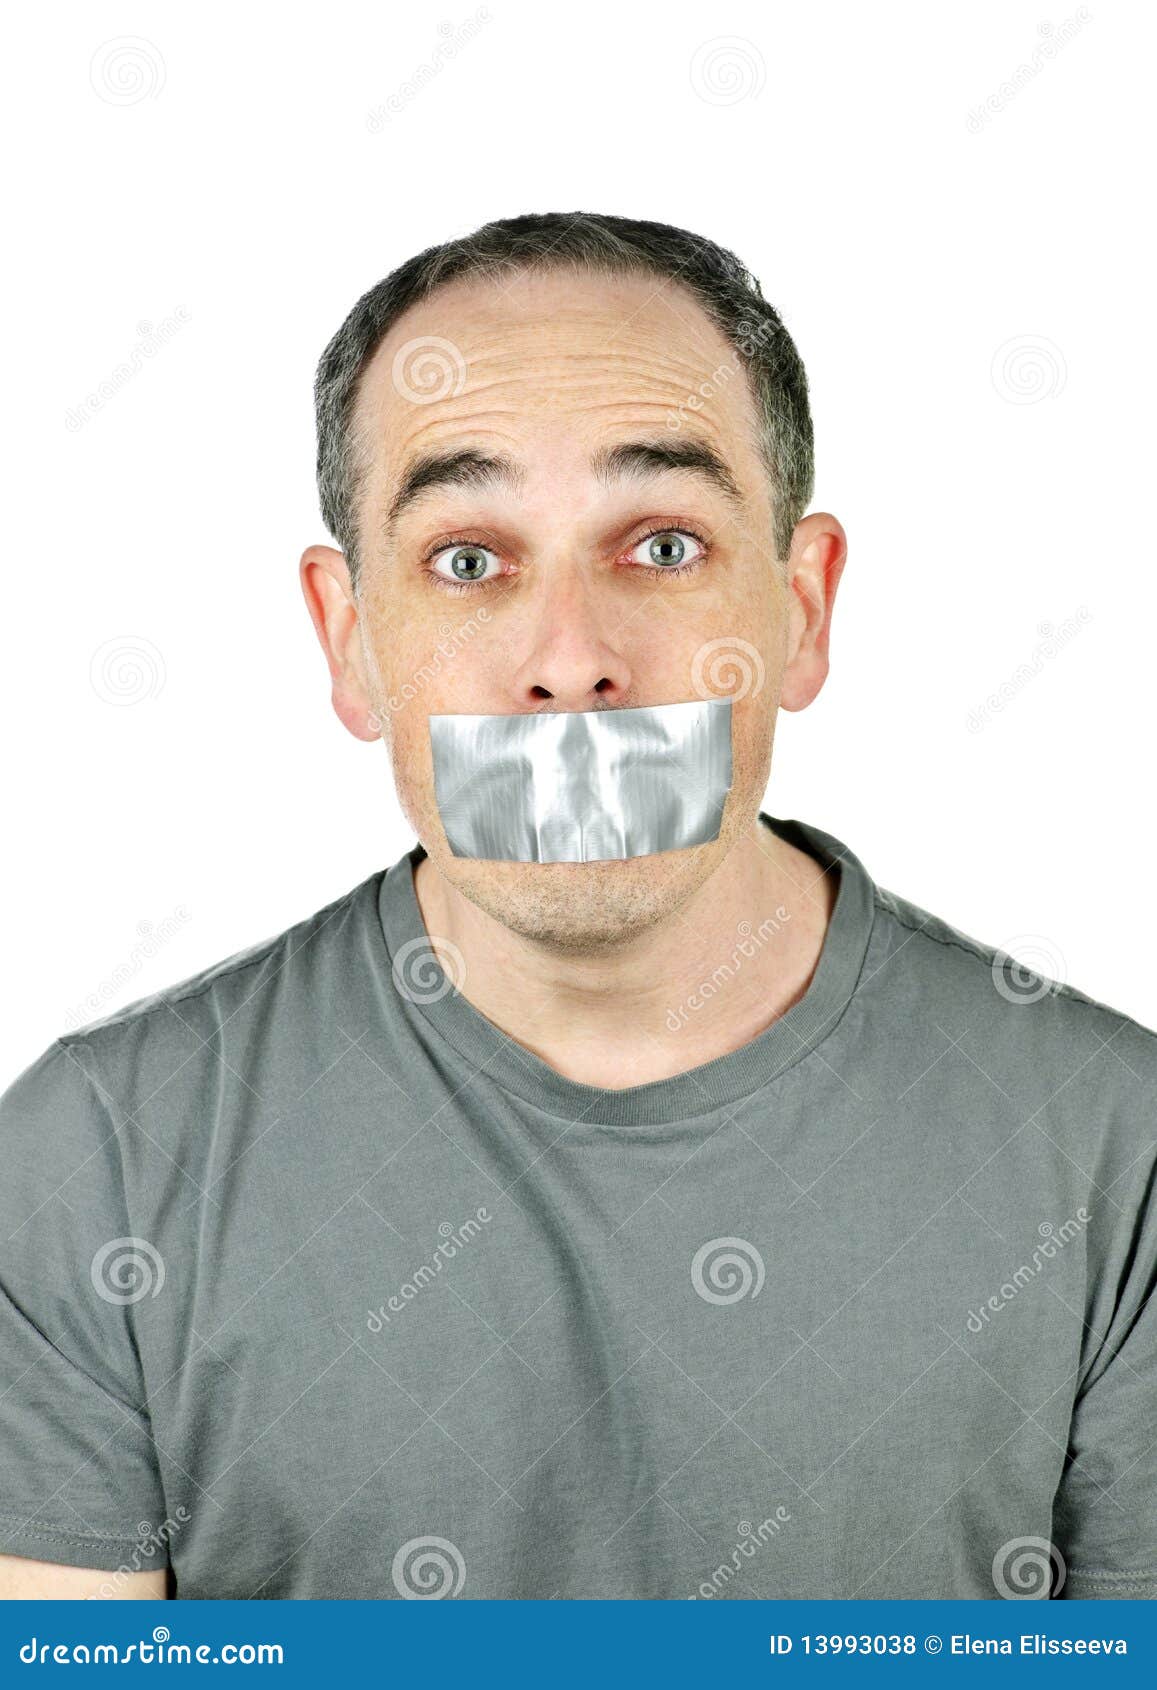 Man Duct Tape Gag Photos - Free & Royalty-Free Stock Photos from Dreamstime